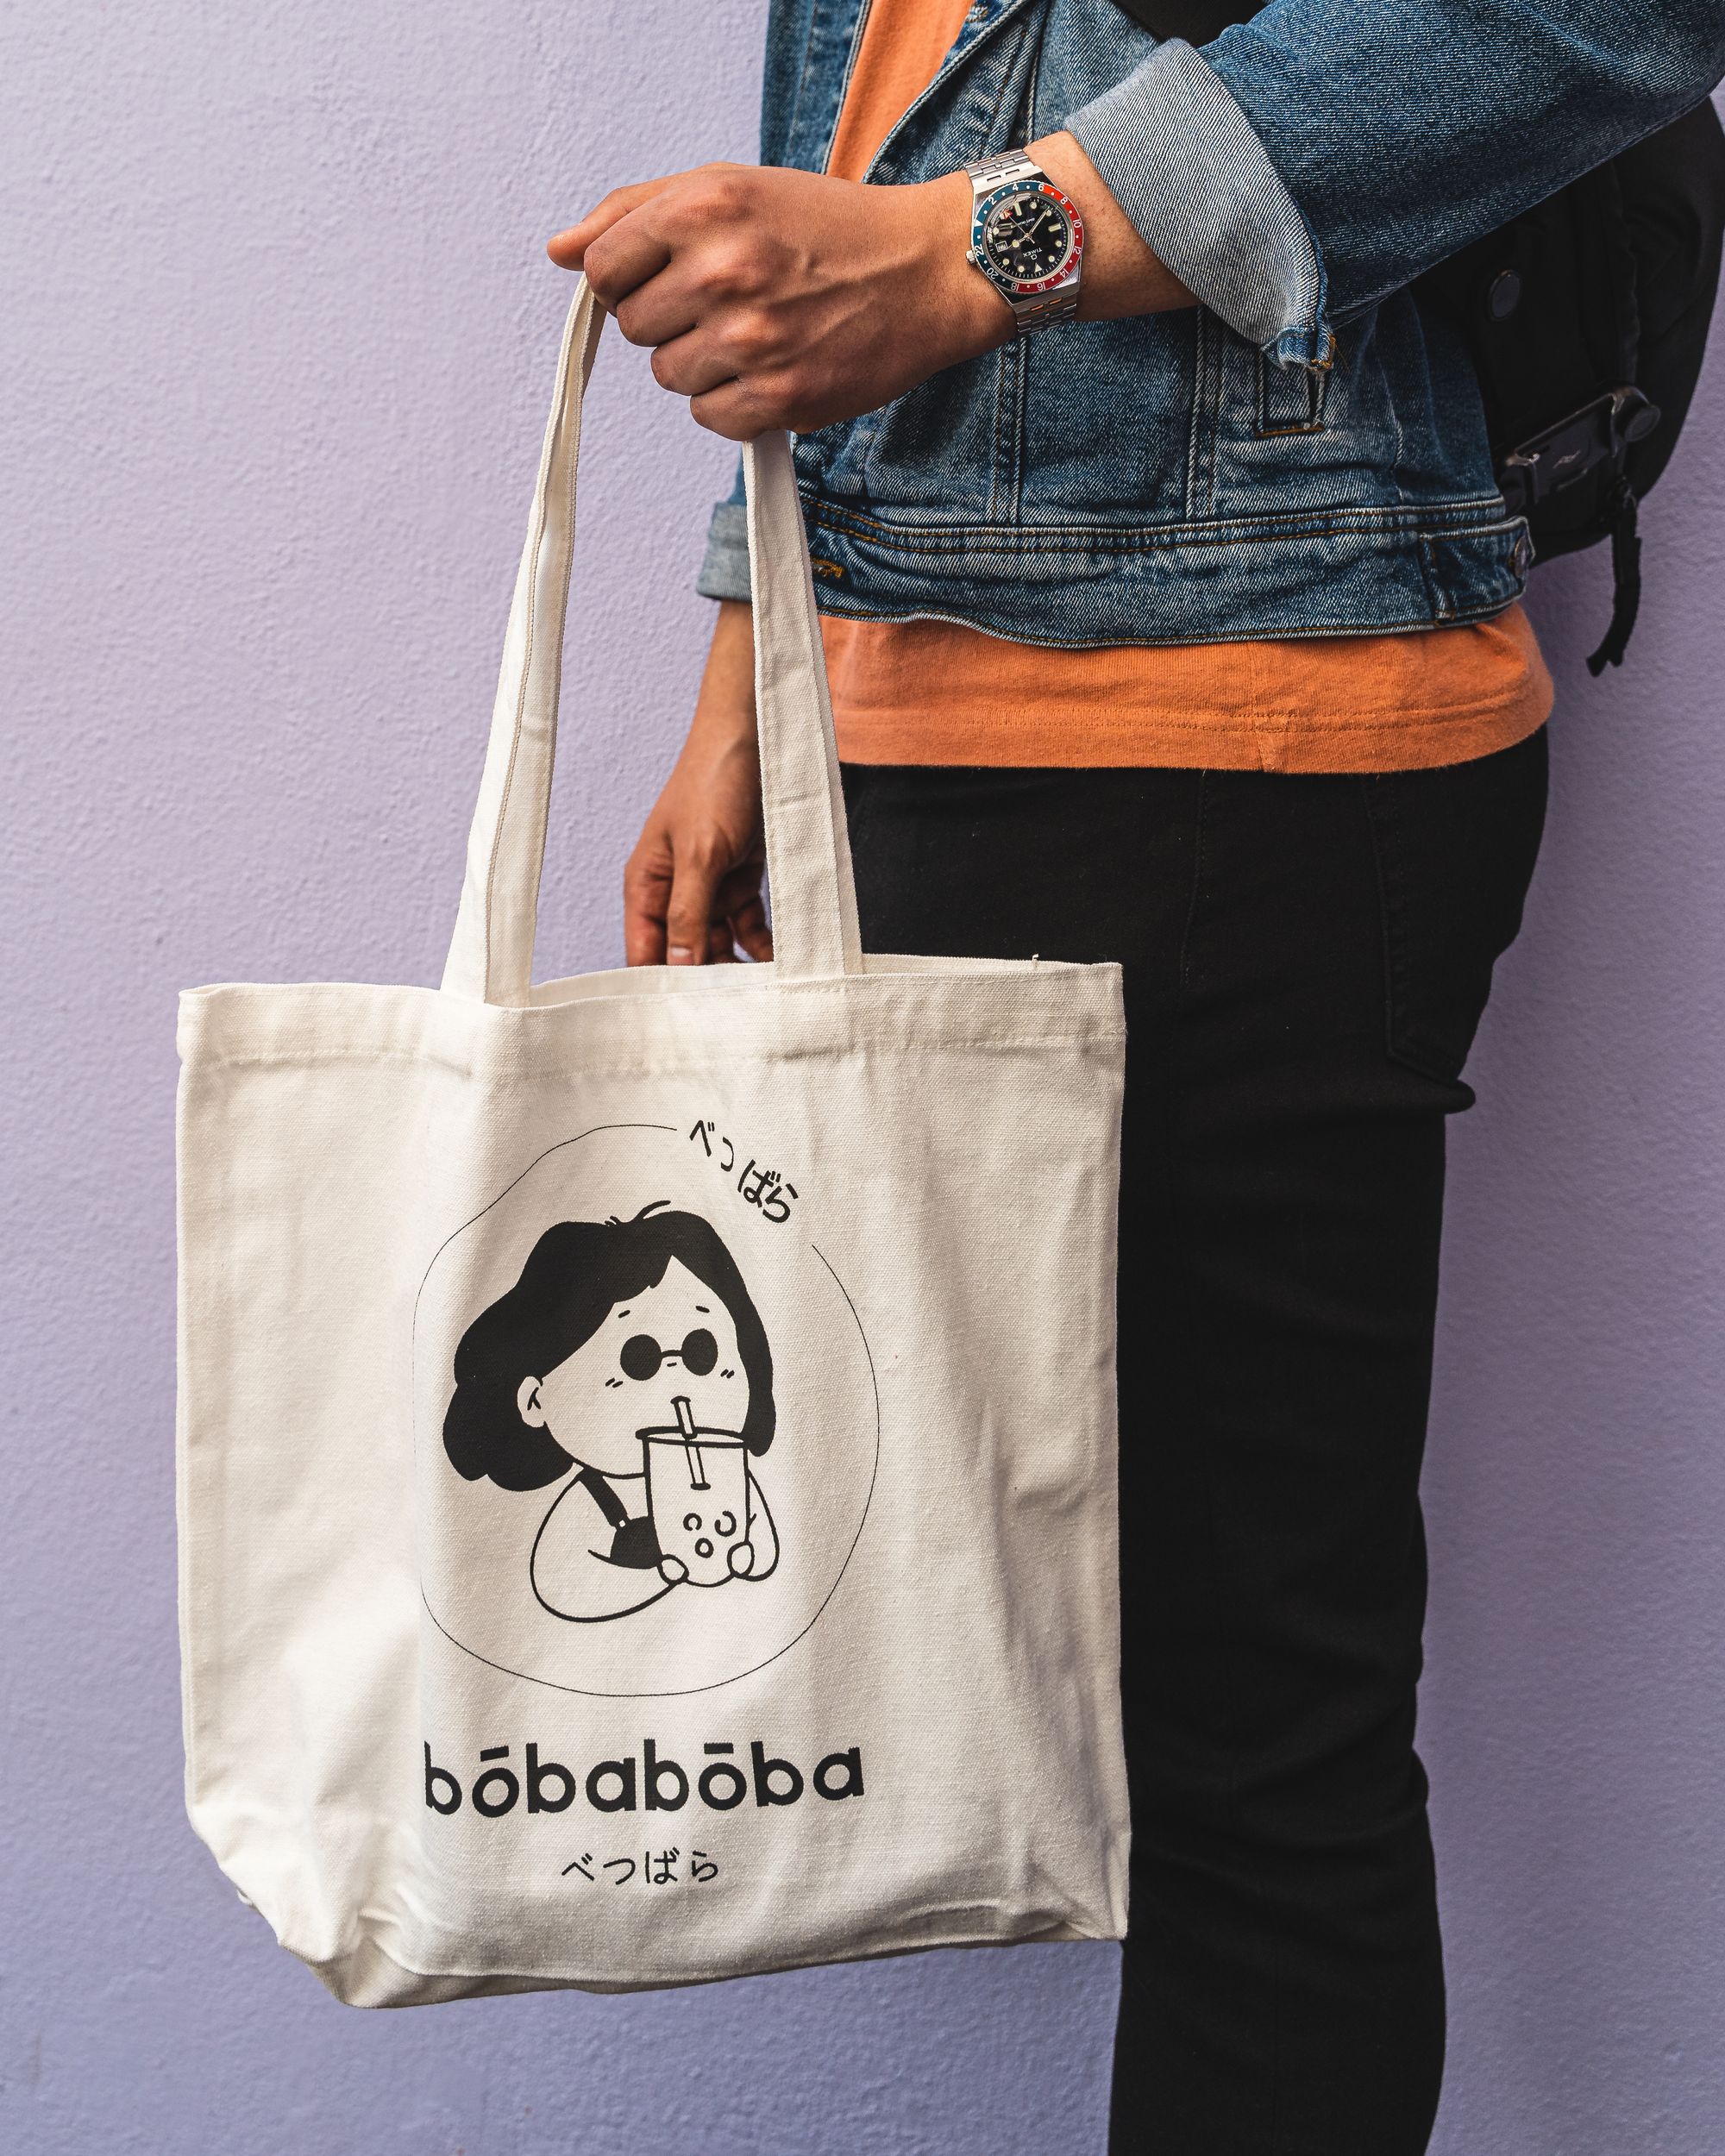 Man holding a white tote bag with a cartoon character sipping buble tea